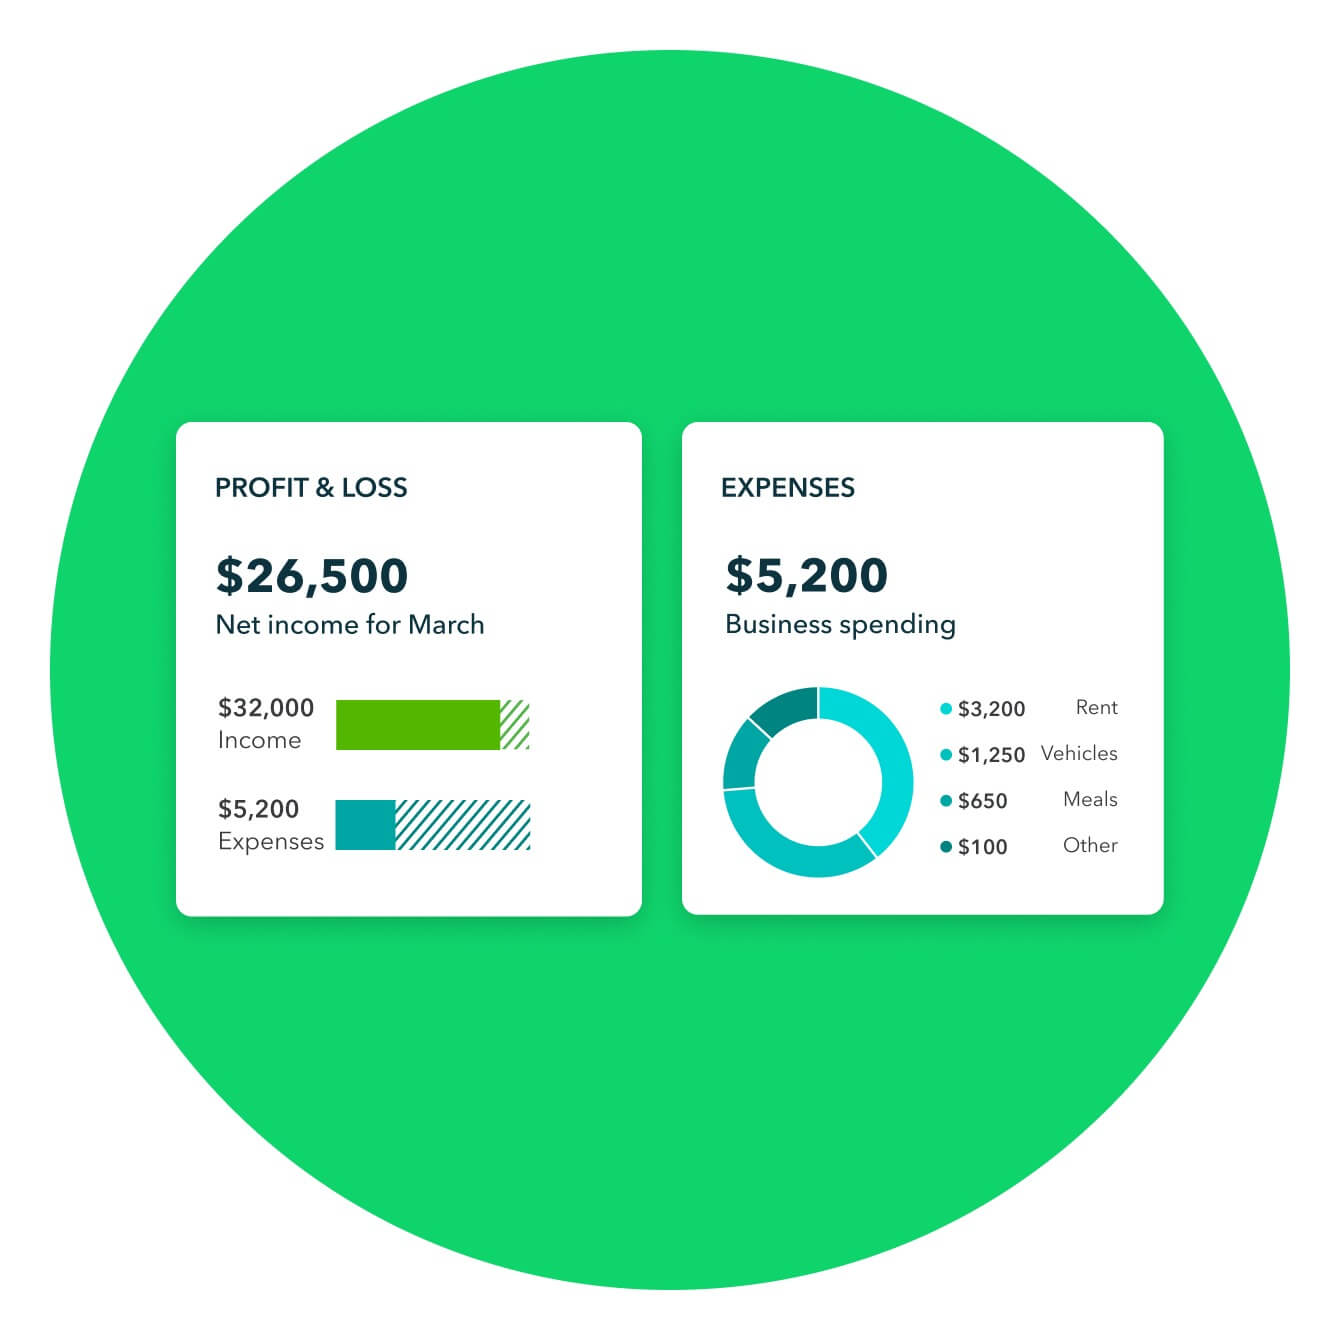 An illustration of the QuickBooks dashboards tiles: Profit and Loss and Expenses.